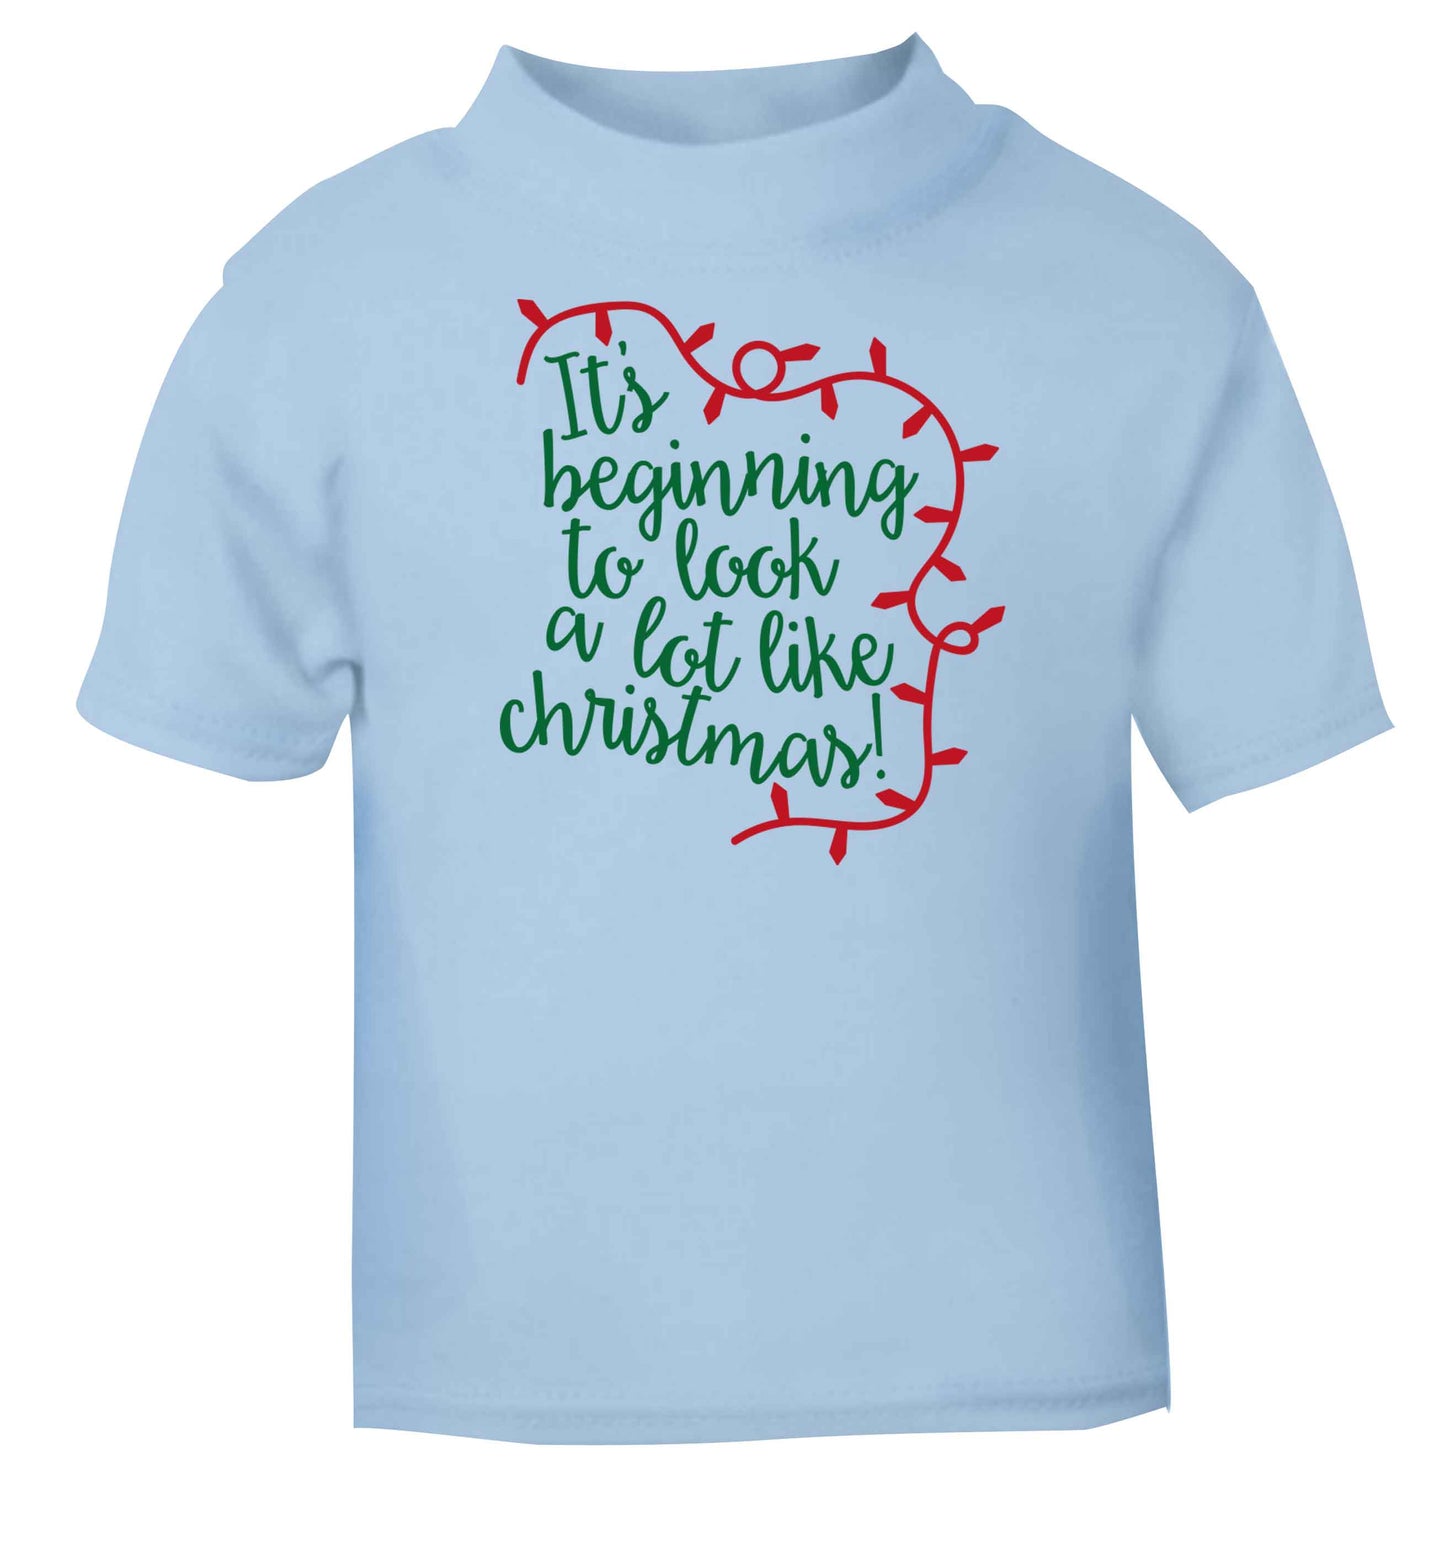 It's beginning to look a lot like Christmas light blue baby toddler Tshirt 2 Years